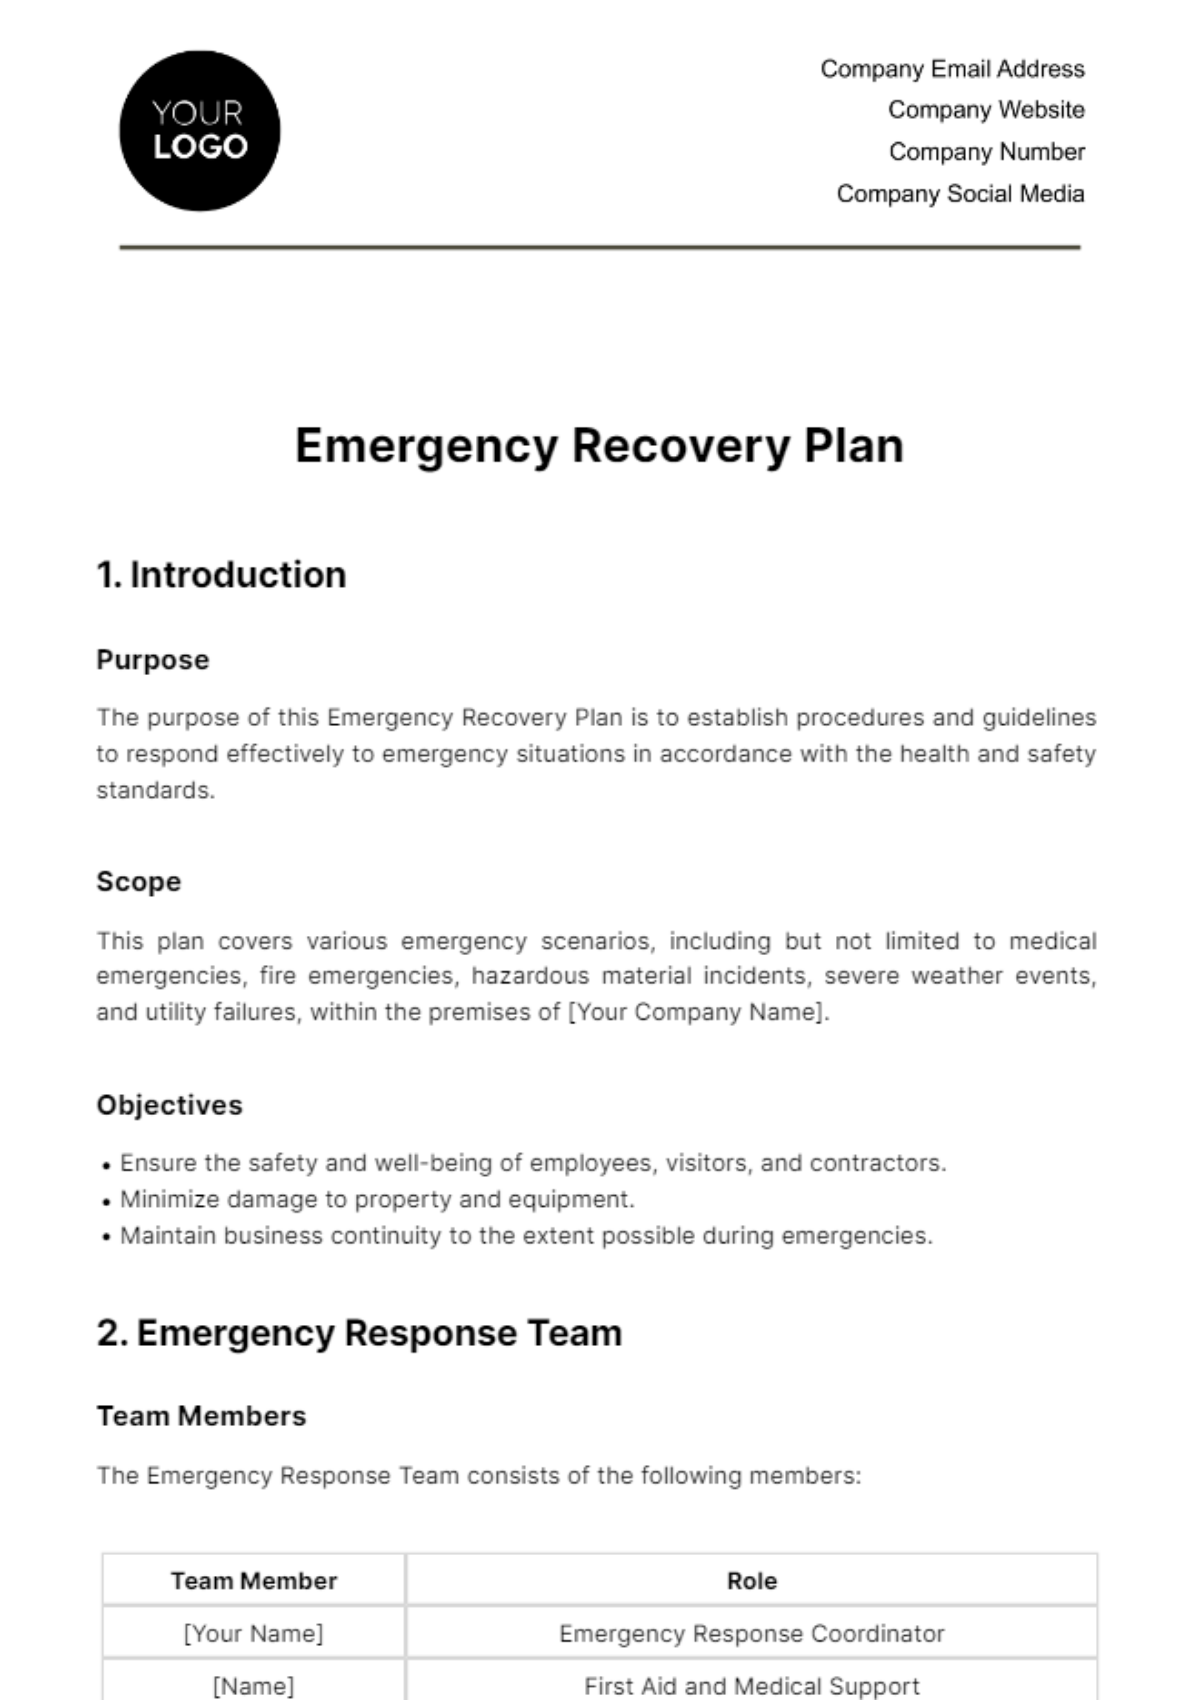 Emergency Recovery Plan Template